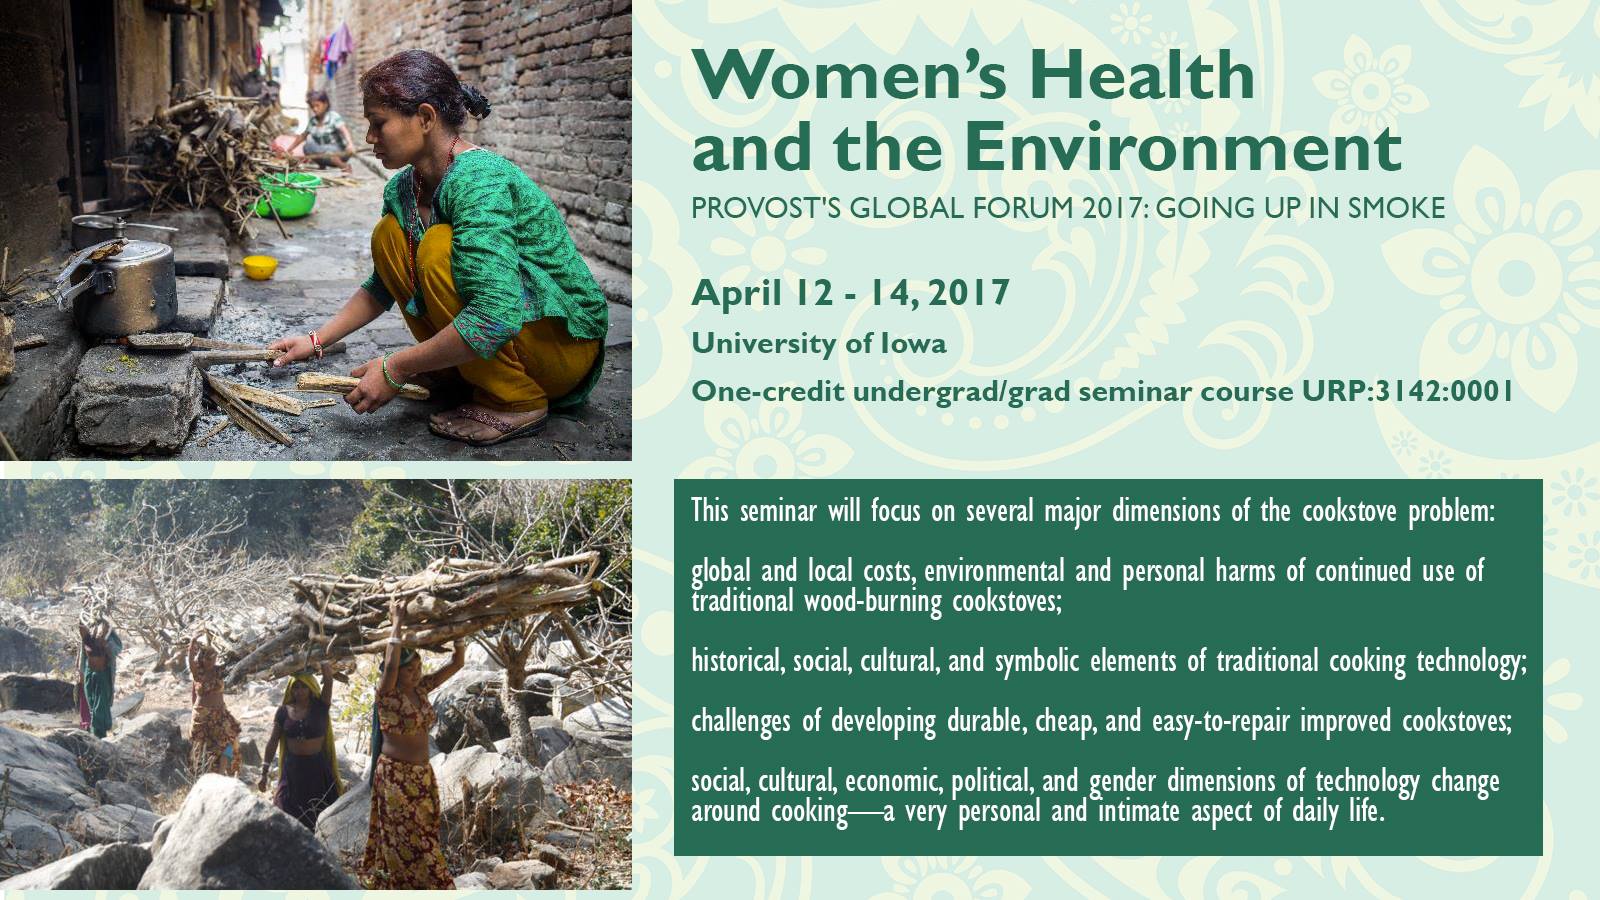 Women's Health and the Environment